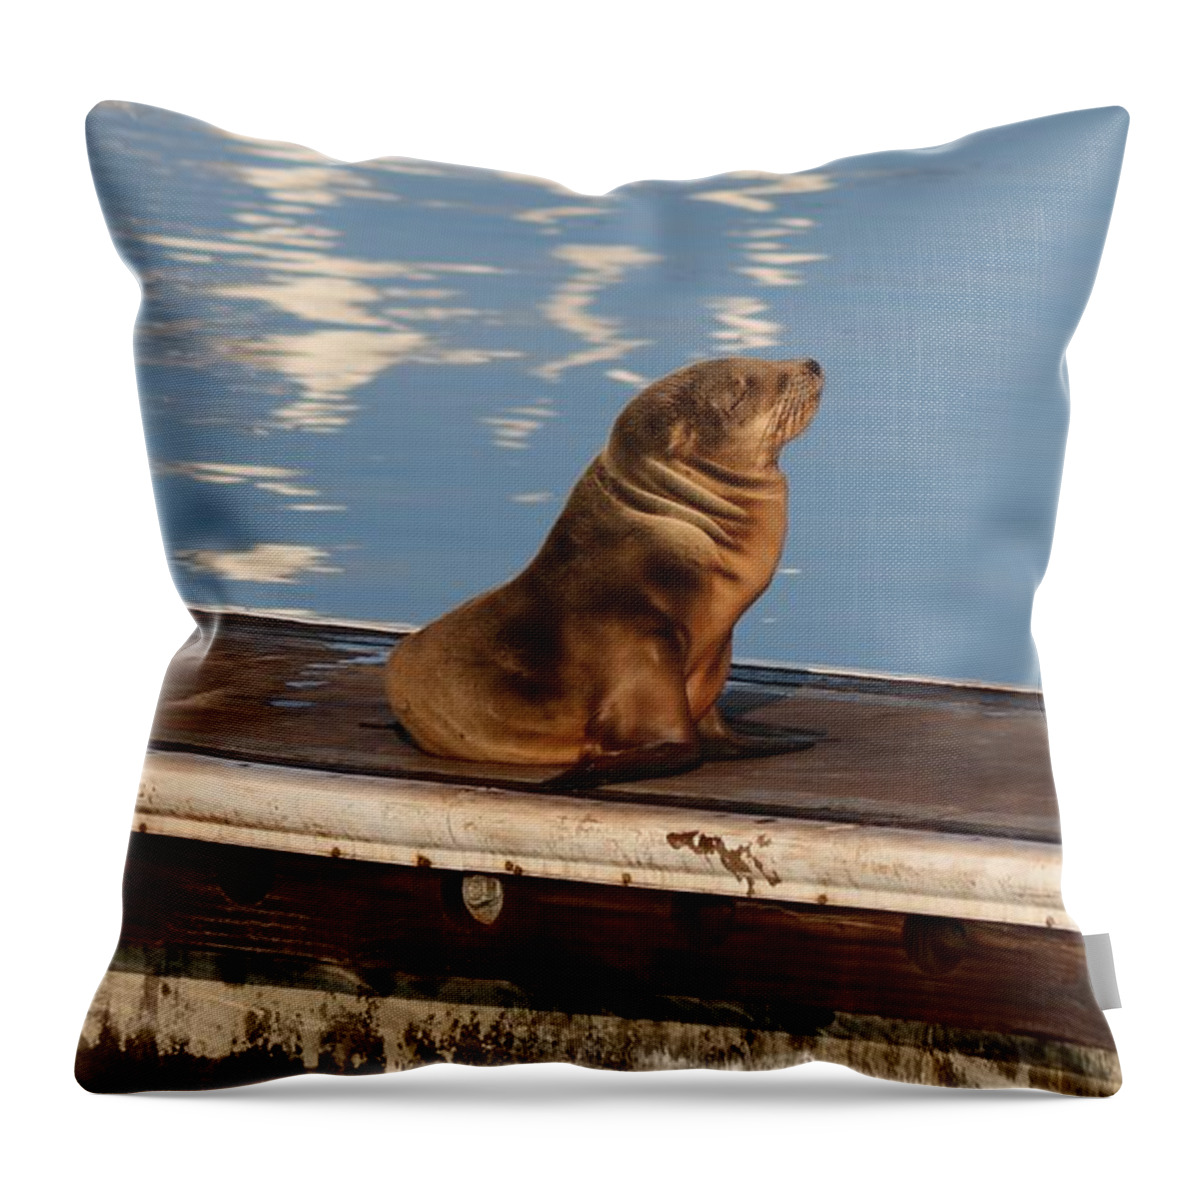 Wild Throw Pillow featuring the photograph Wild Pup Sun Bathing by Christy Pooschke